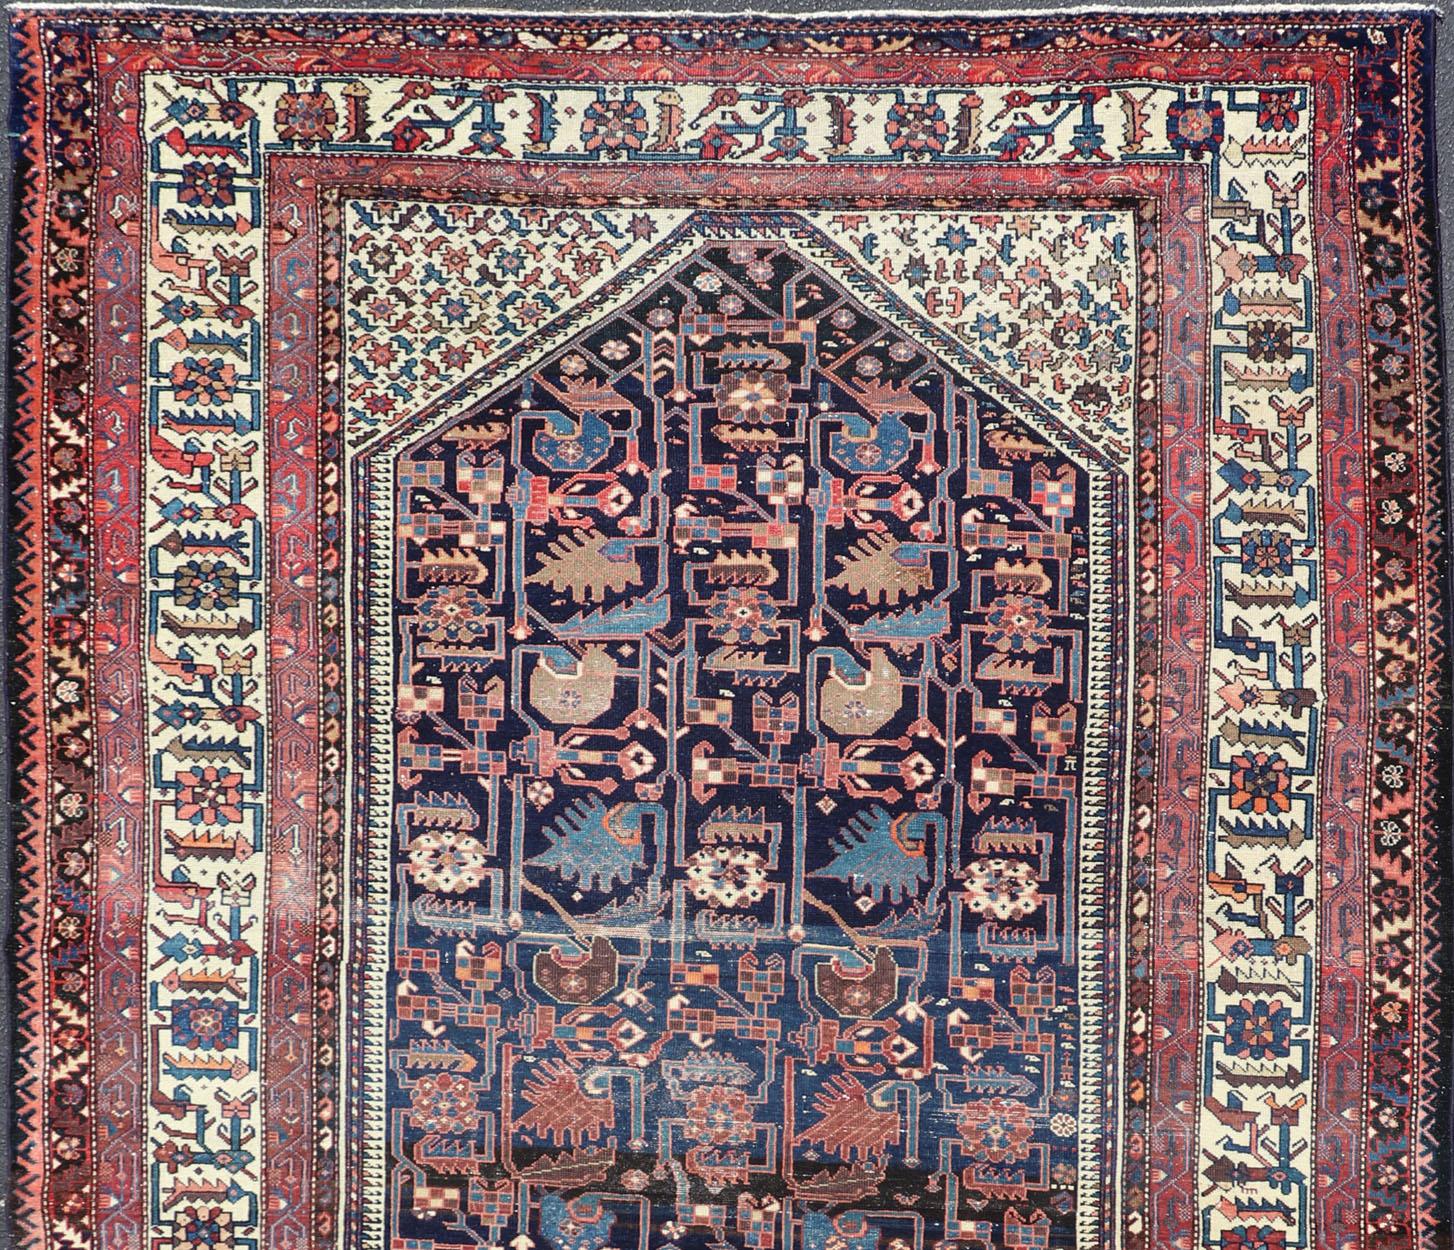 A unique design, antique Persian Hamadan gallery runner with all-over geometric motifs, rug EMB-8505-178408, country of origin / type: Iran / Hamadan, circa 1910

This antique Persian gallery carpet, from the Hamadan district in western Persia,